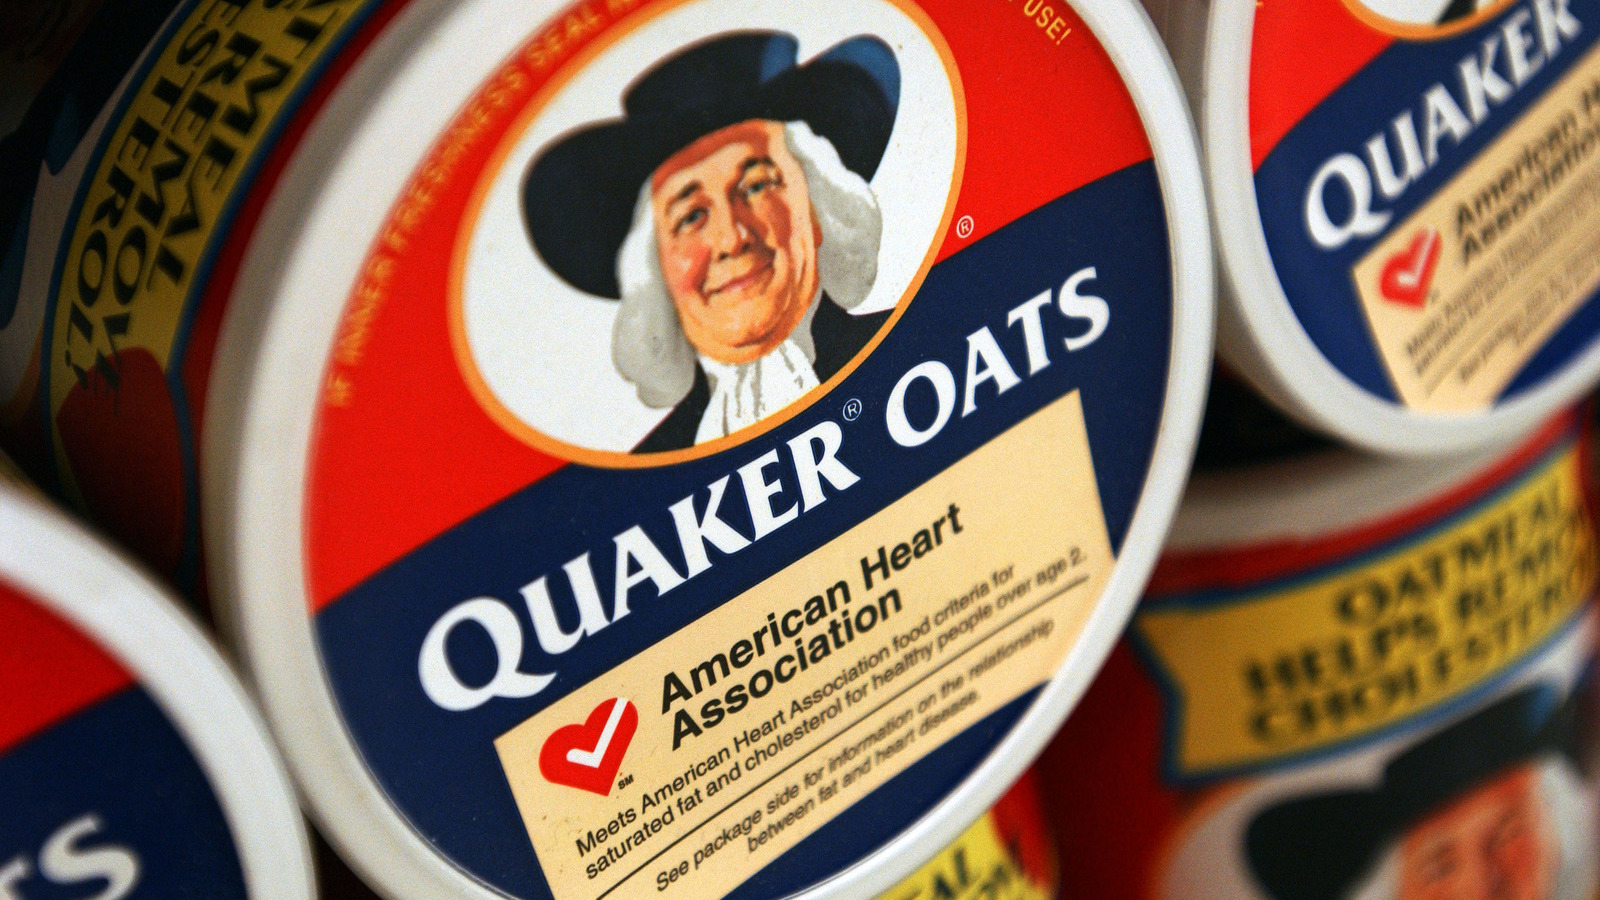 Does The Quaker Oats Guy Have A Connection To William Penn?